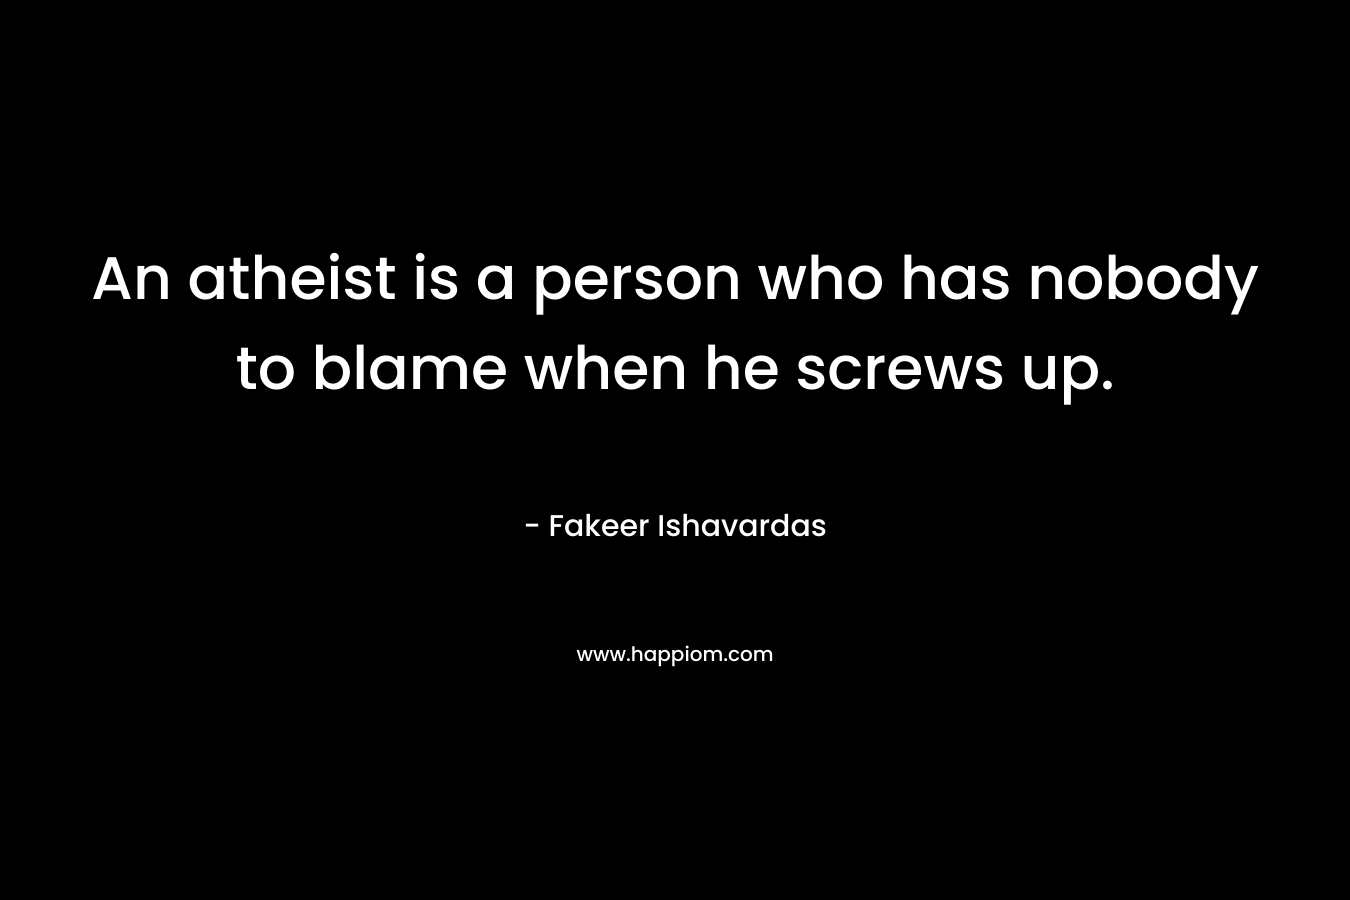 An atheist is a person who has nobody to blame when he screws up. – Fakeer Ishavardas